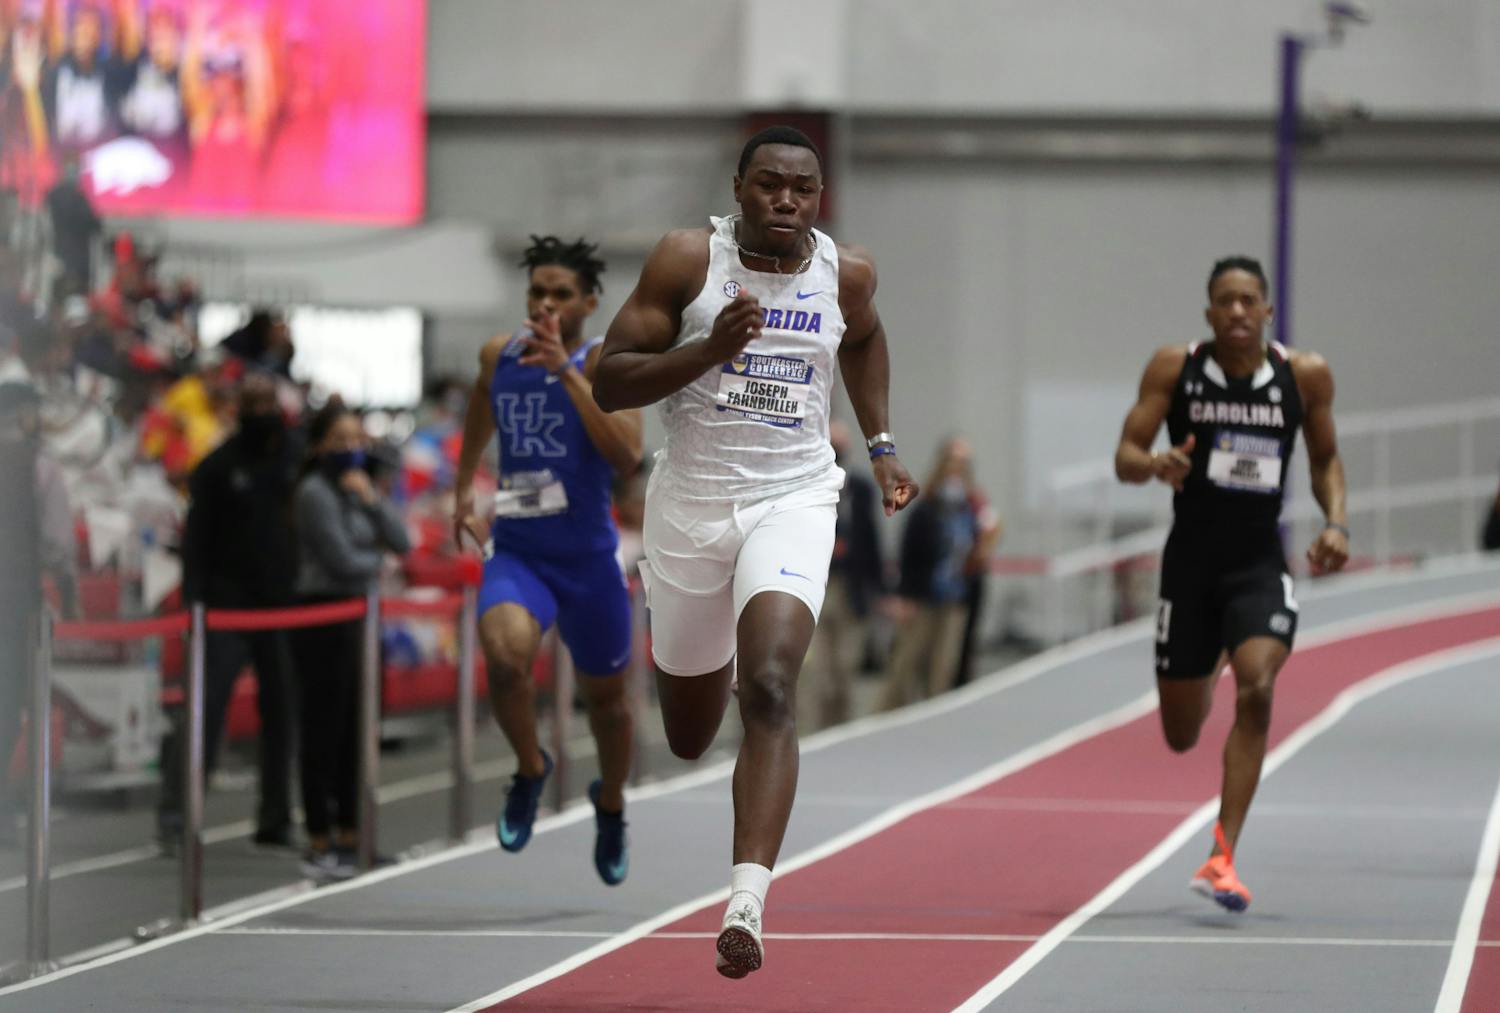 Florida&#x27;s Joseph Fahnbulleh competes during the SEC Indoor Track and Field Championships on Saturday, February 27, 2021 at Randal Tyson Track Center in Fayetteville, Ark. / UAA Communications photo by Alex de la Osa. Fahnbulleh ran the 200-meter dash in 20.39 in Oxford, Mississippi.